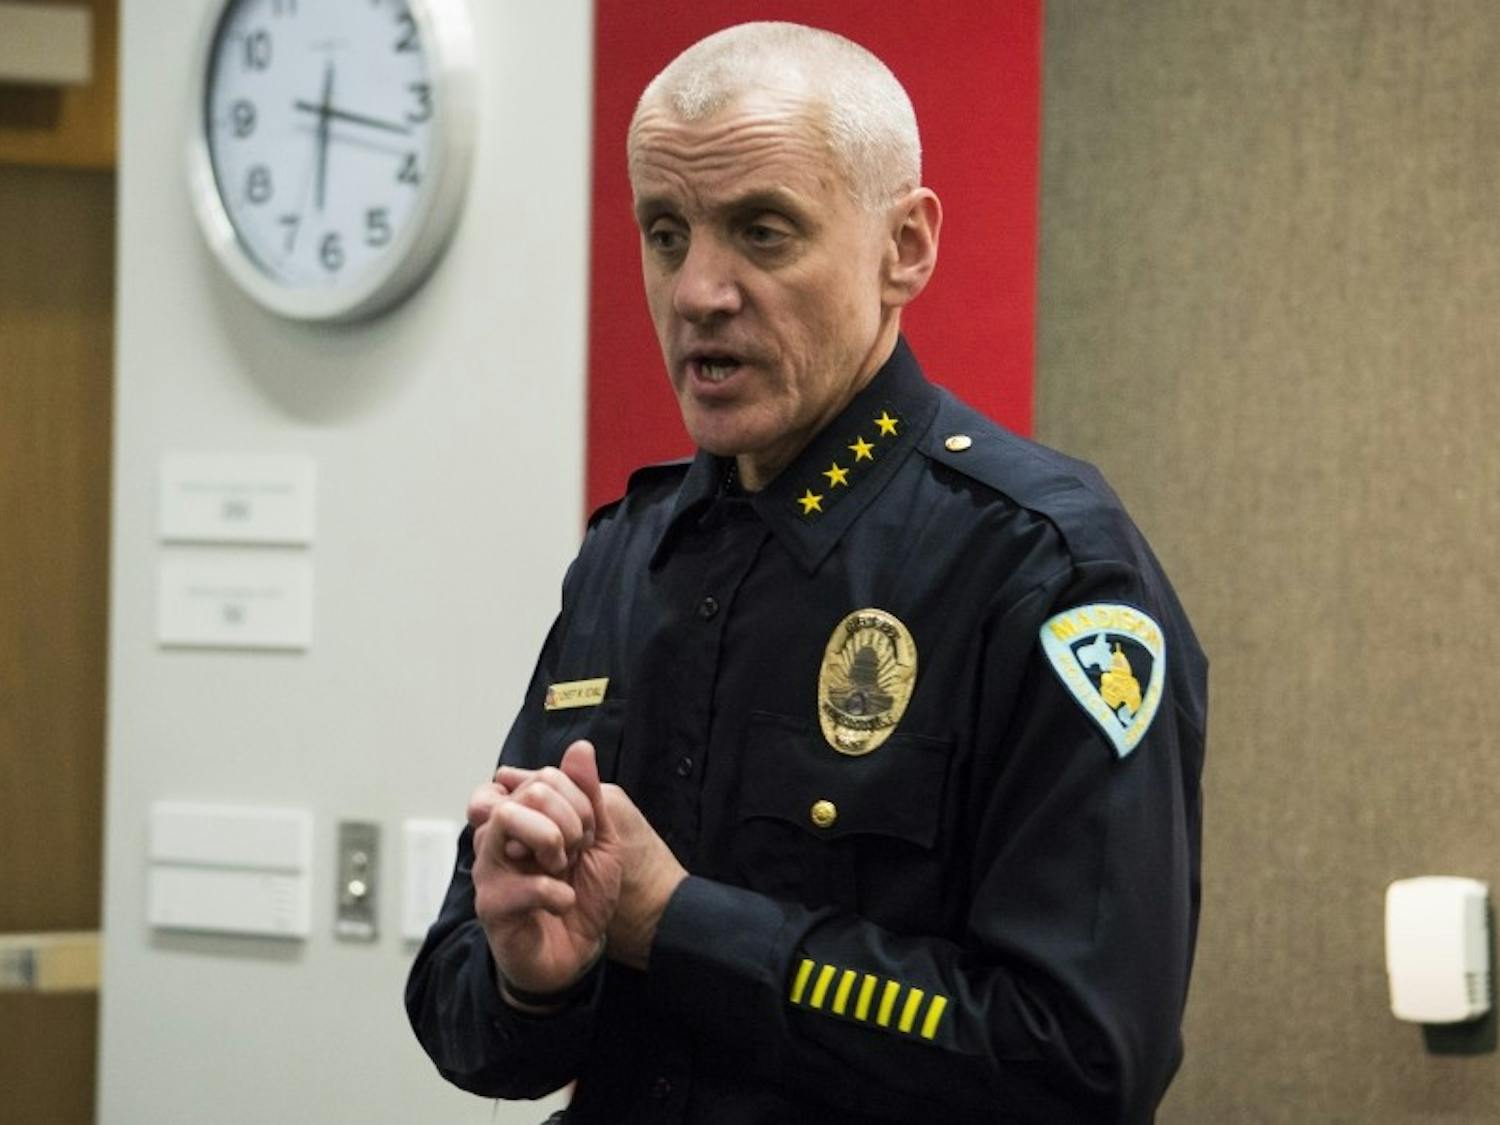 Madison Police Chief Mike Koval and Dane County District Attorney Ismael Ozanne traded blows online today following Koval’s blog post that criticized the juvenile justice system.